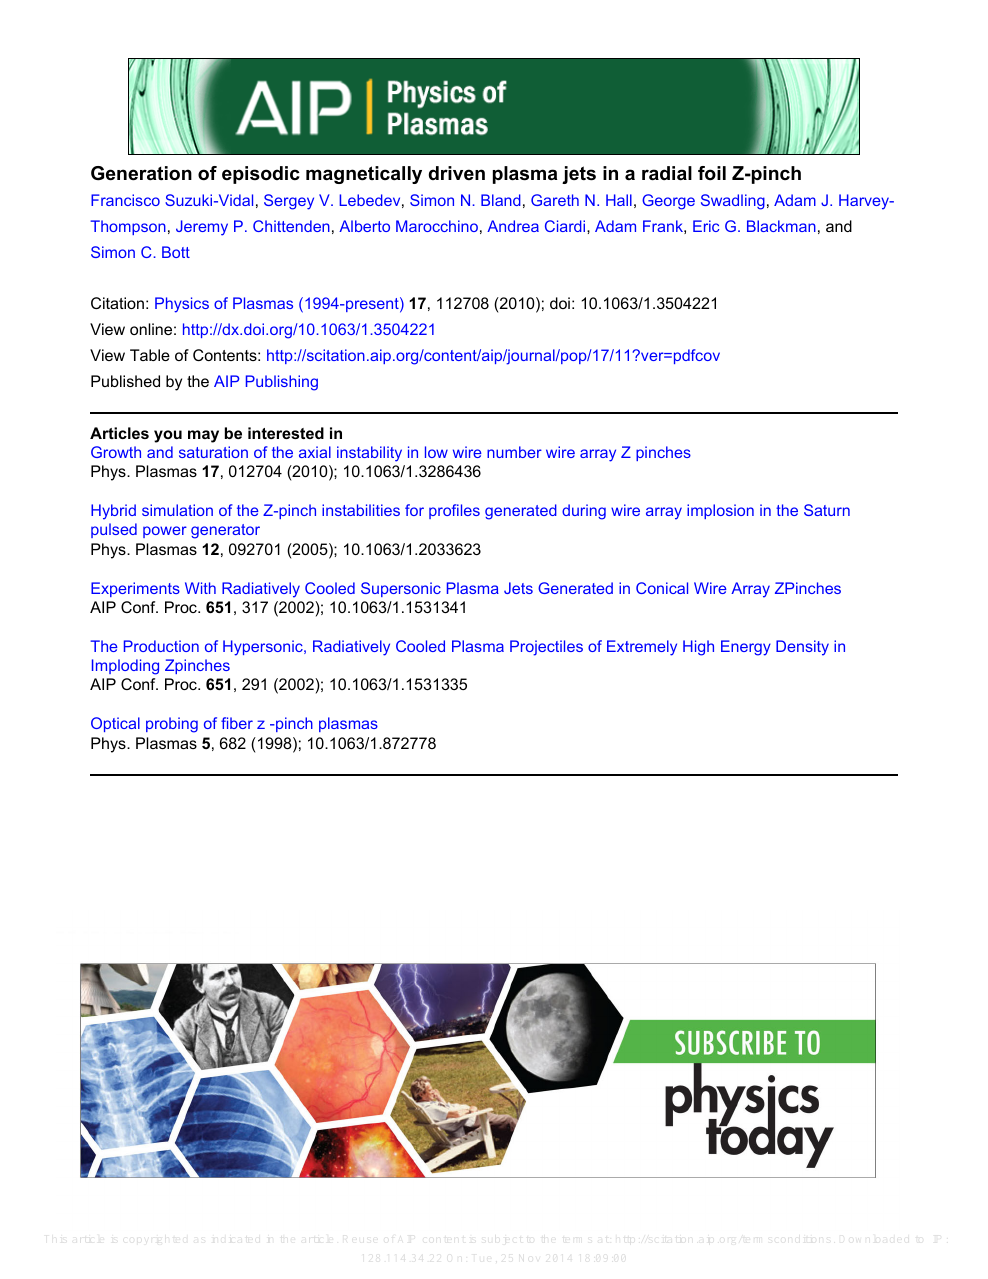 Generation Of Episodic Magnetically Driven Plasma Jets In A Radial Foil Z Pinch Topic Of Research Paper In Physical Sciences Download Scholarly Article Pdf And Read For Free On Cyberleninka Open Science